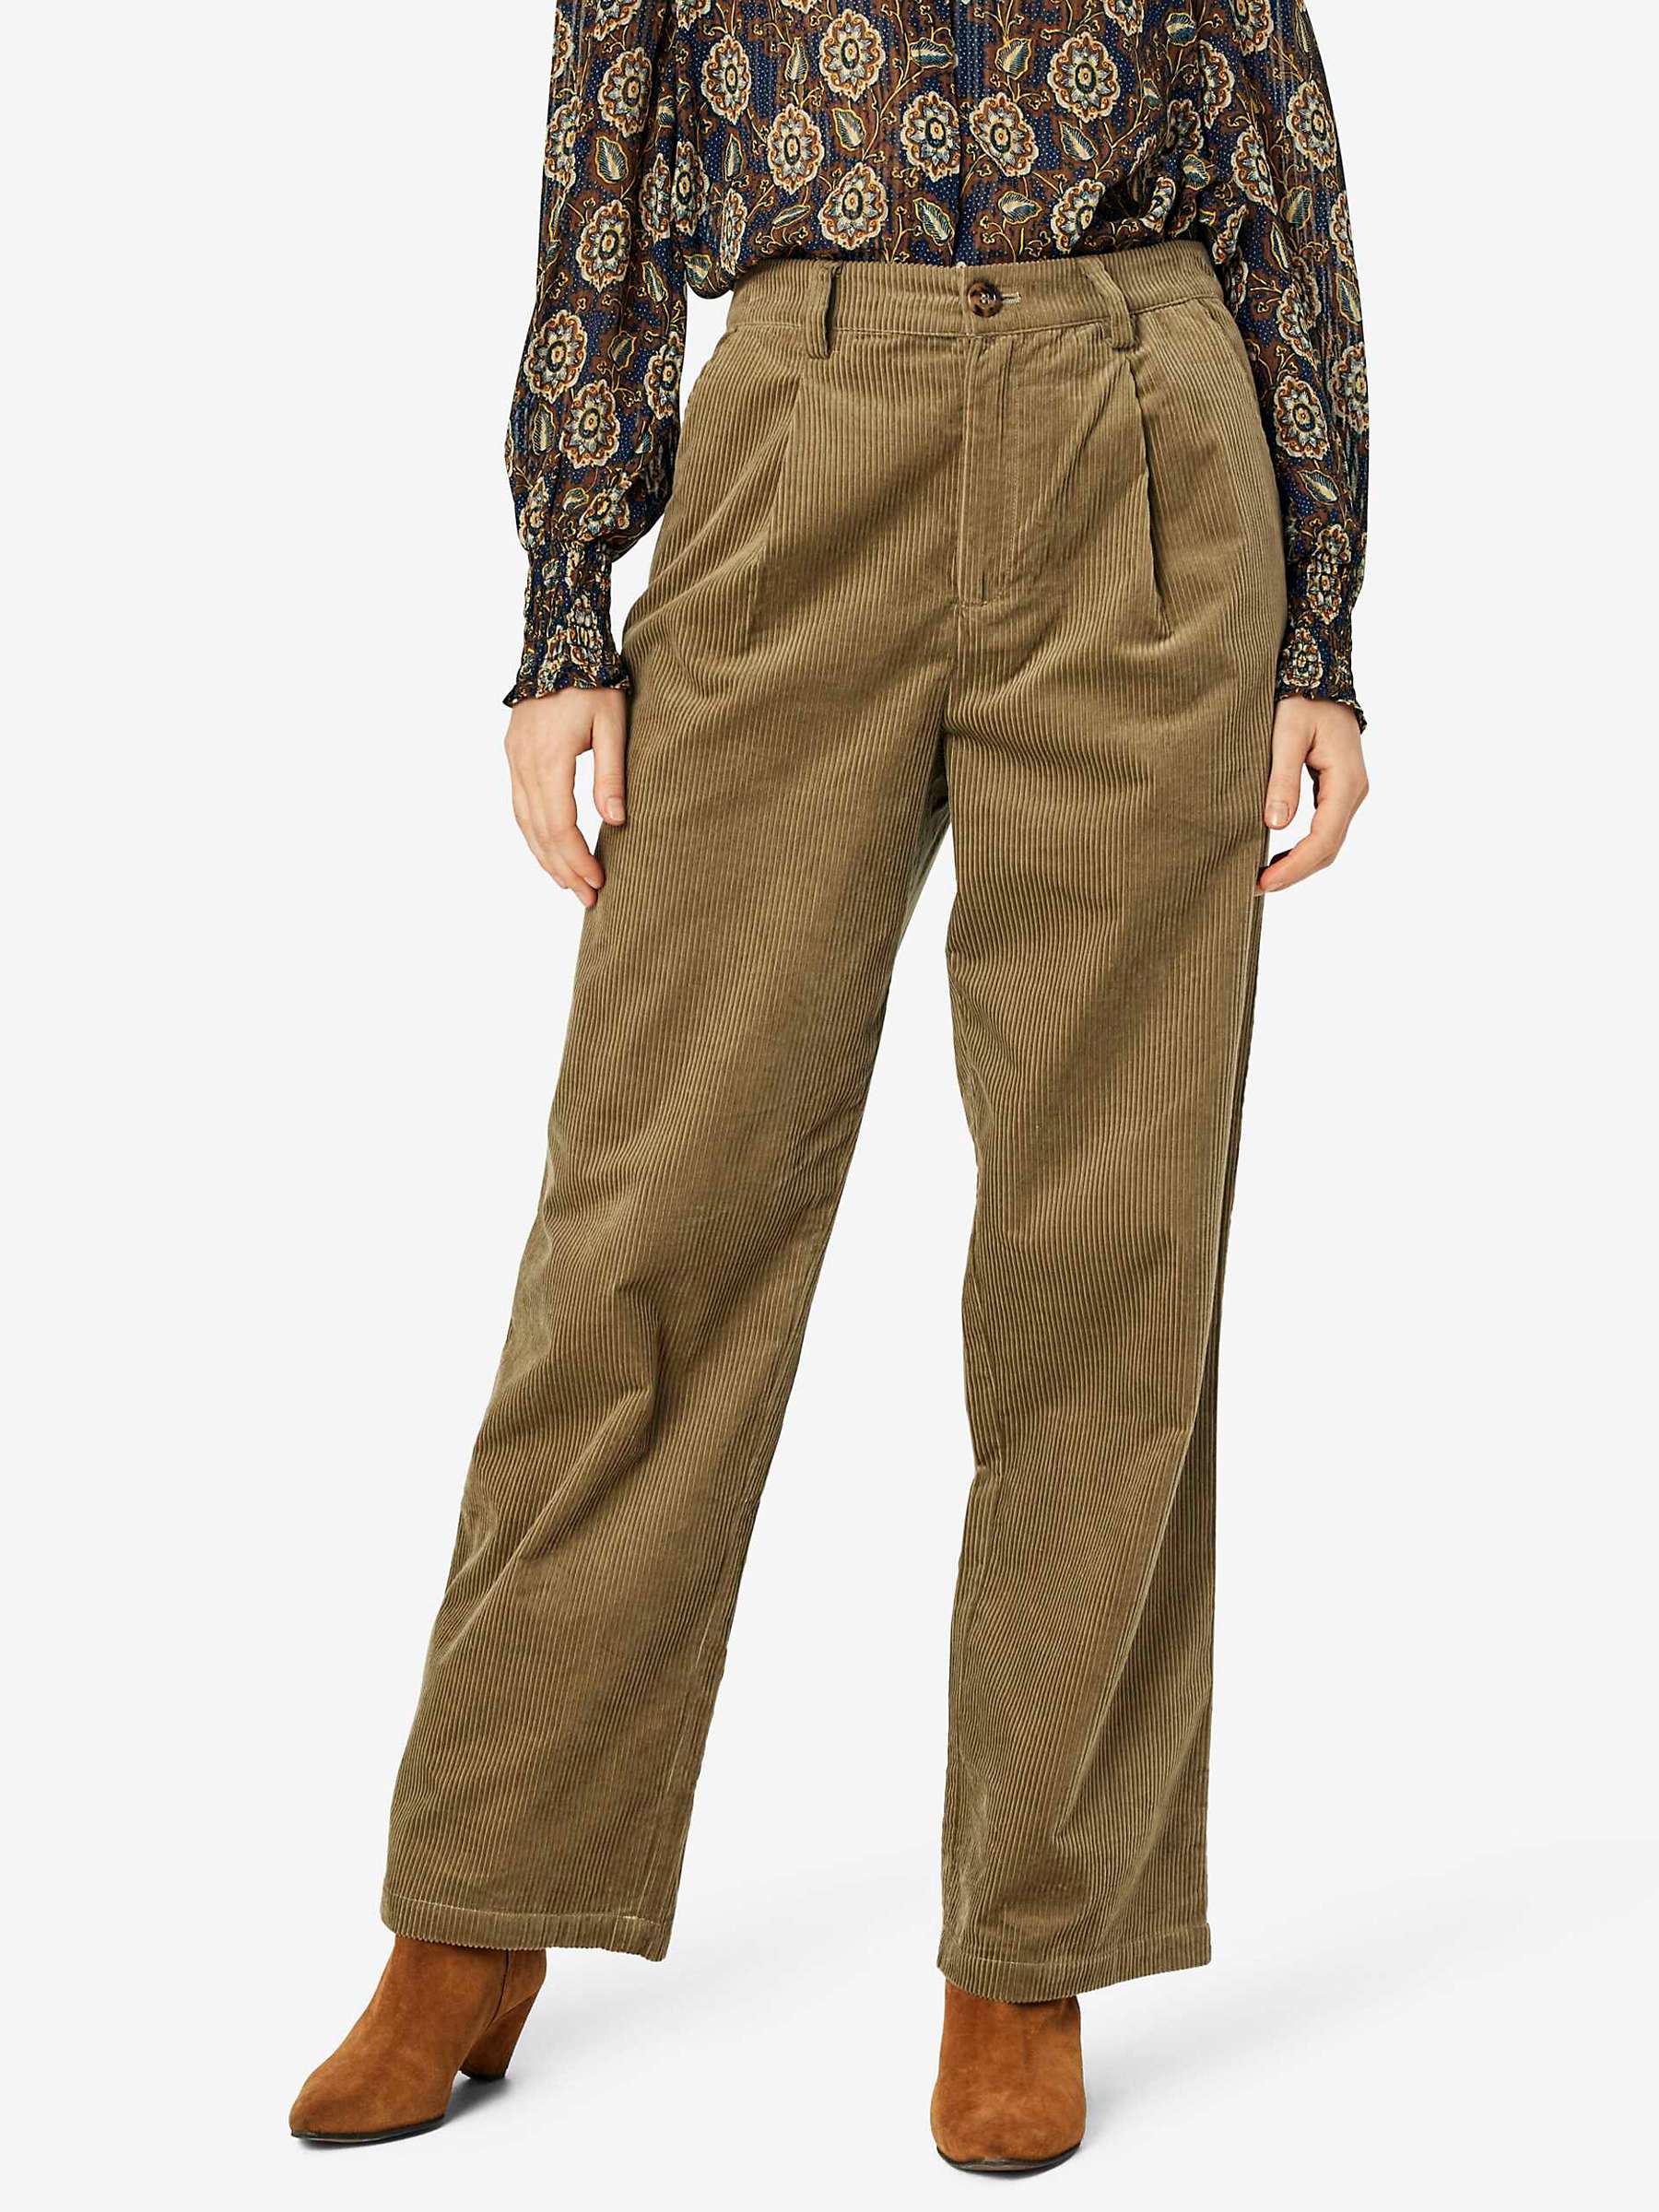 Buy Noa Noa Trine Relaxed Cord Trousers, Capers Green Online at johnlewis.com